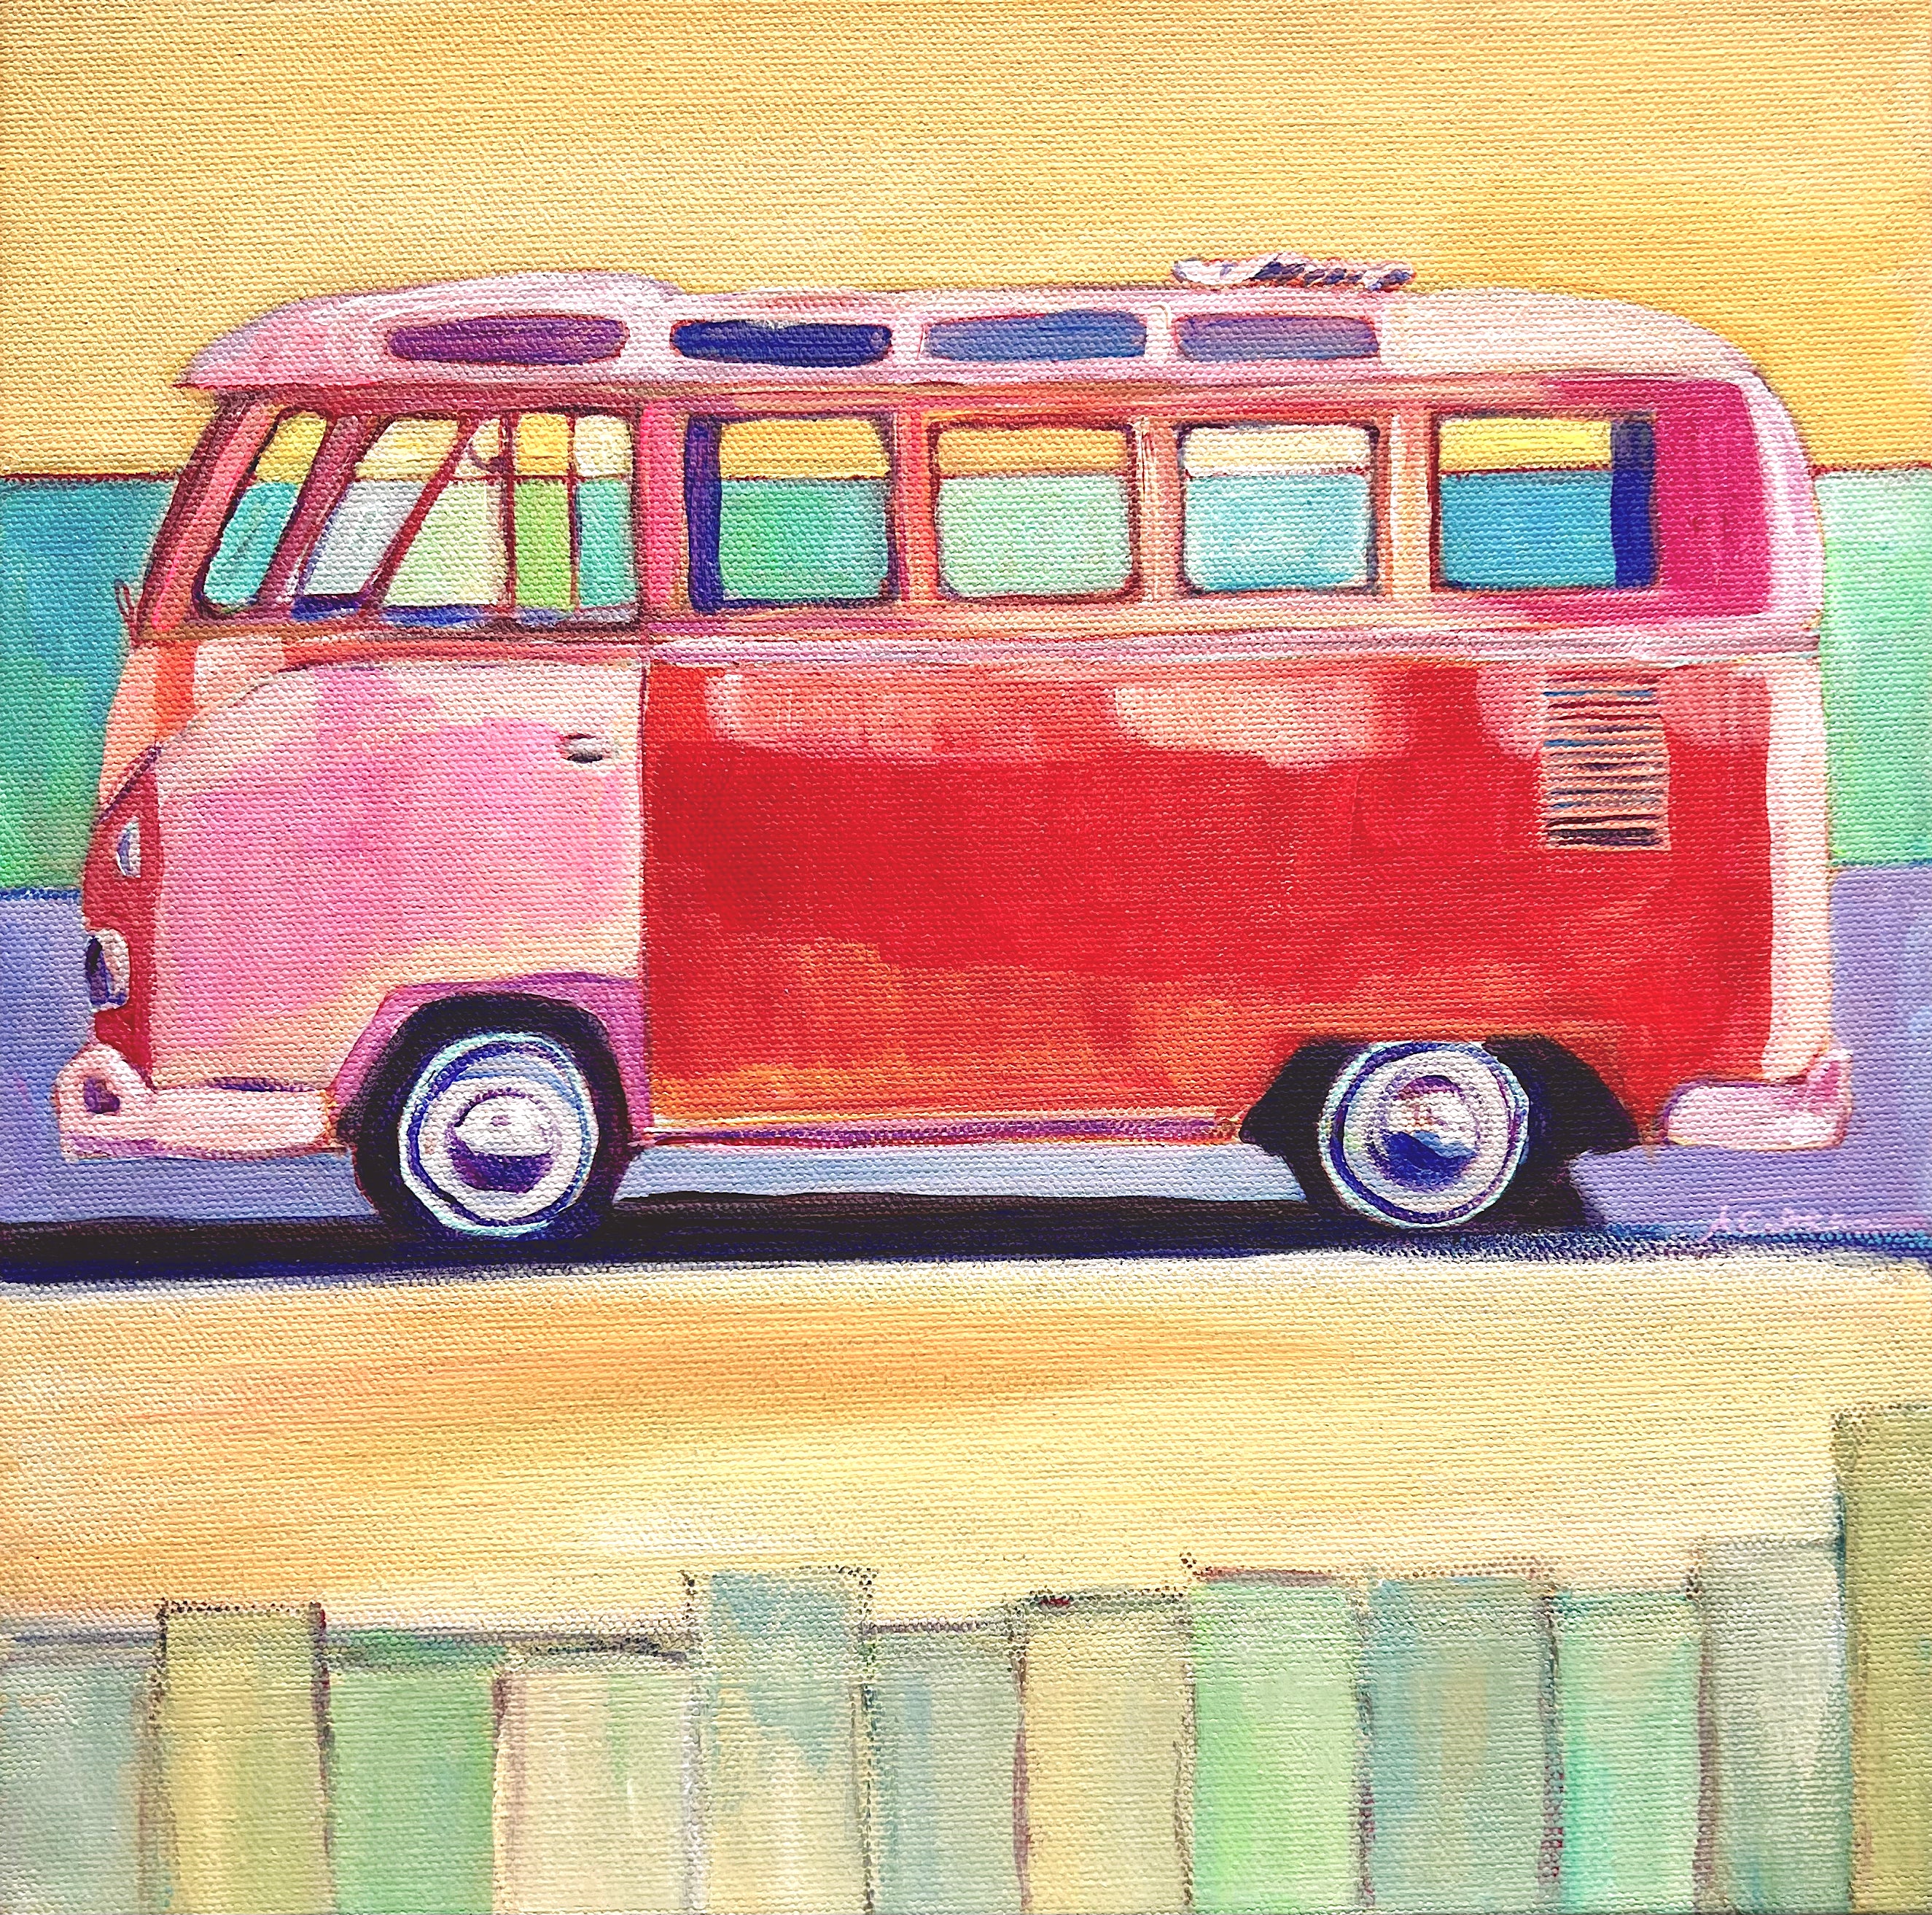 The Bus 12x12 in. SOLD